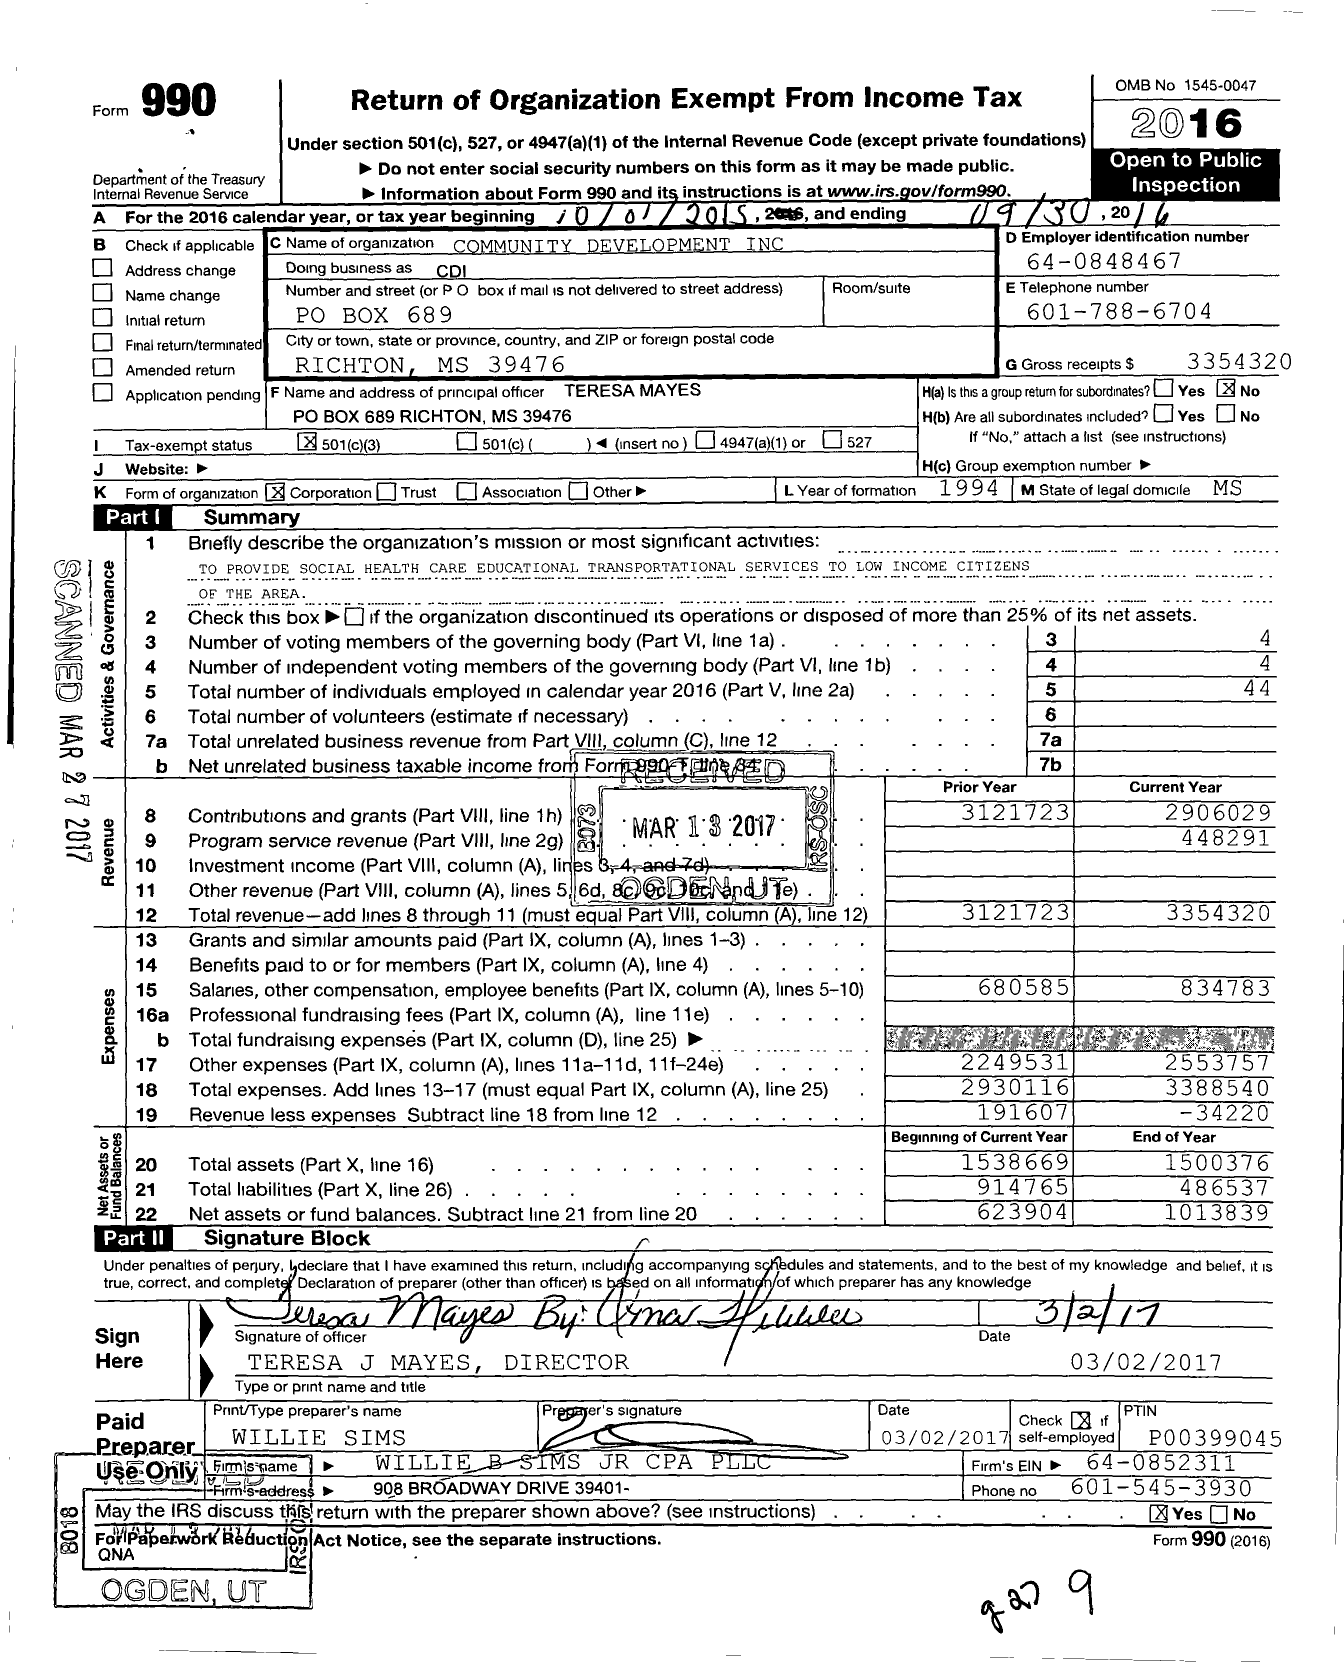 Image of first page of 2015 Form 990 for Community Development (CDI)